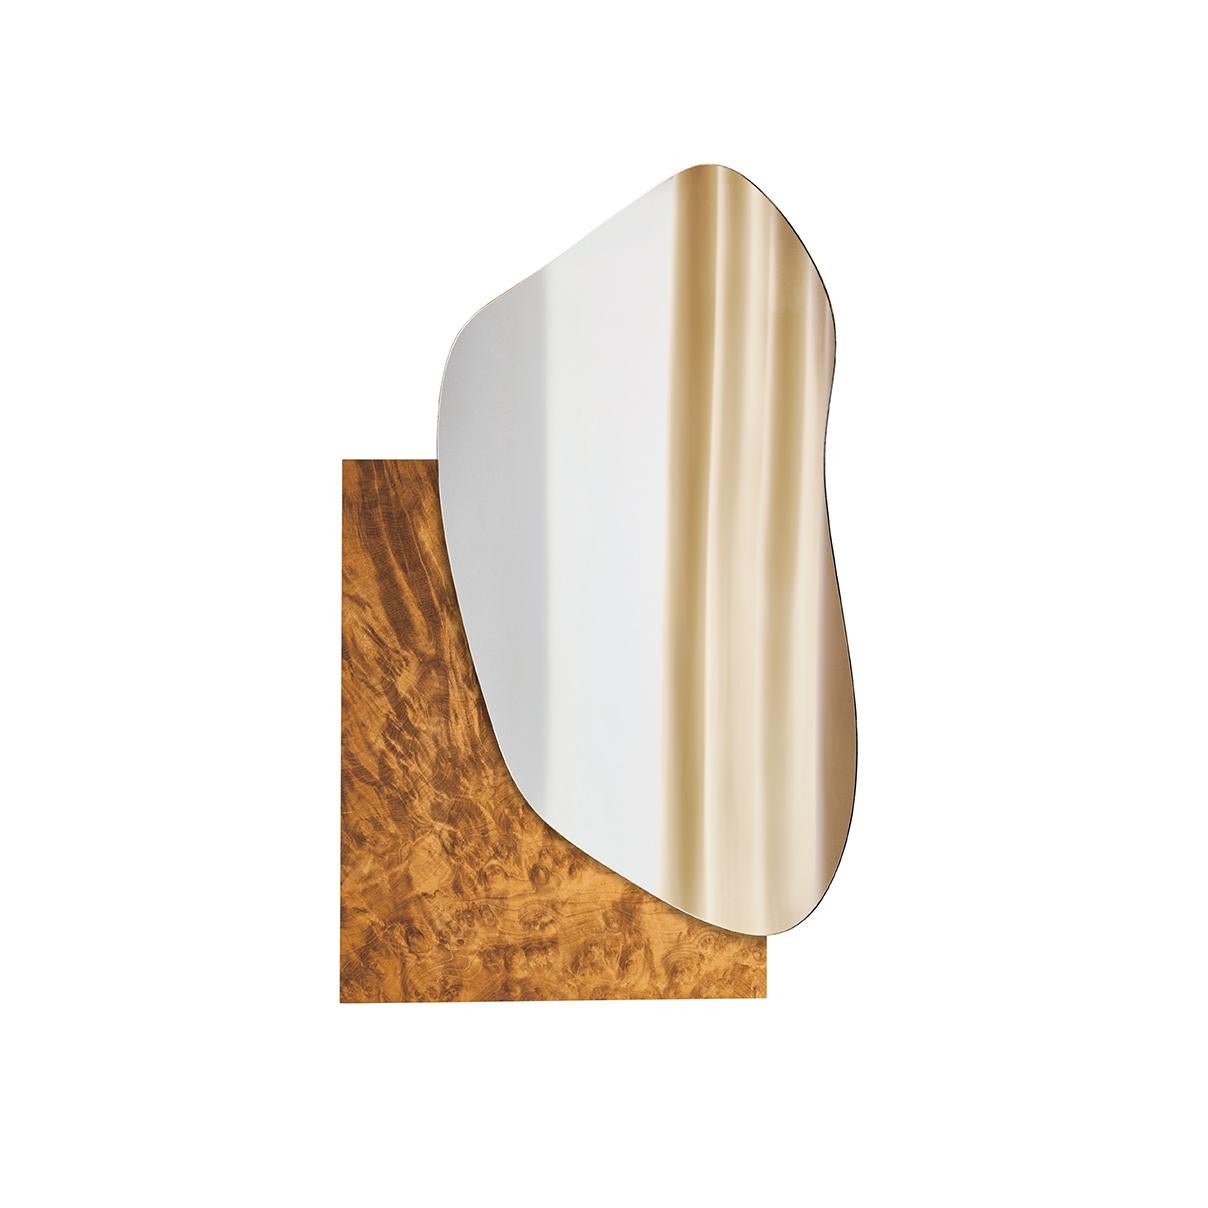 Painted Modern Wall Mirror Lake 1 by Noom with White Marble Statuario Base